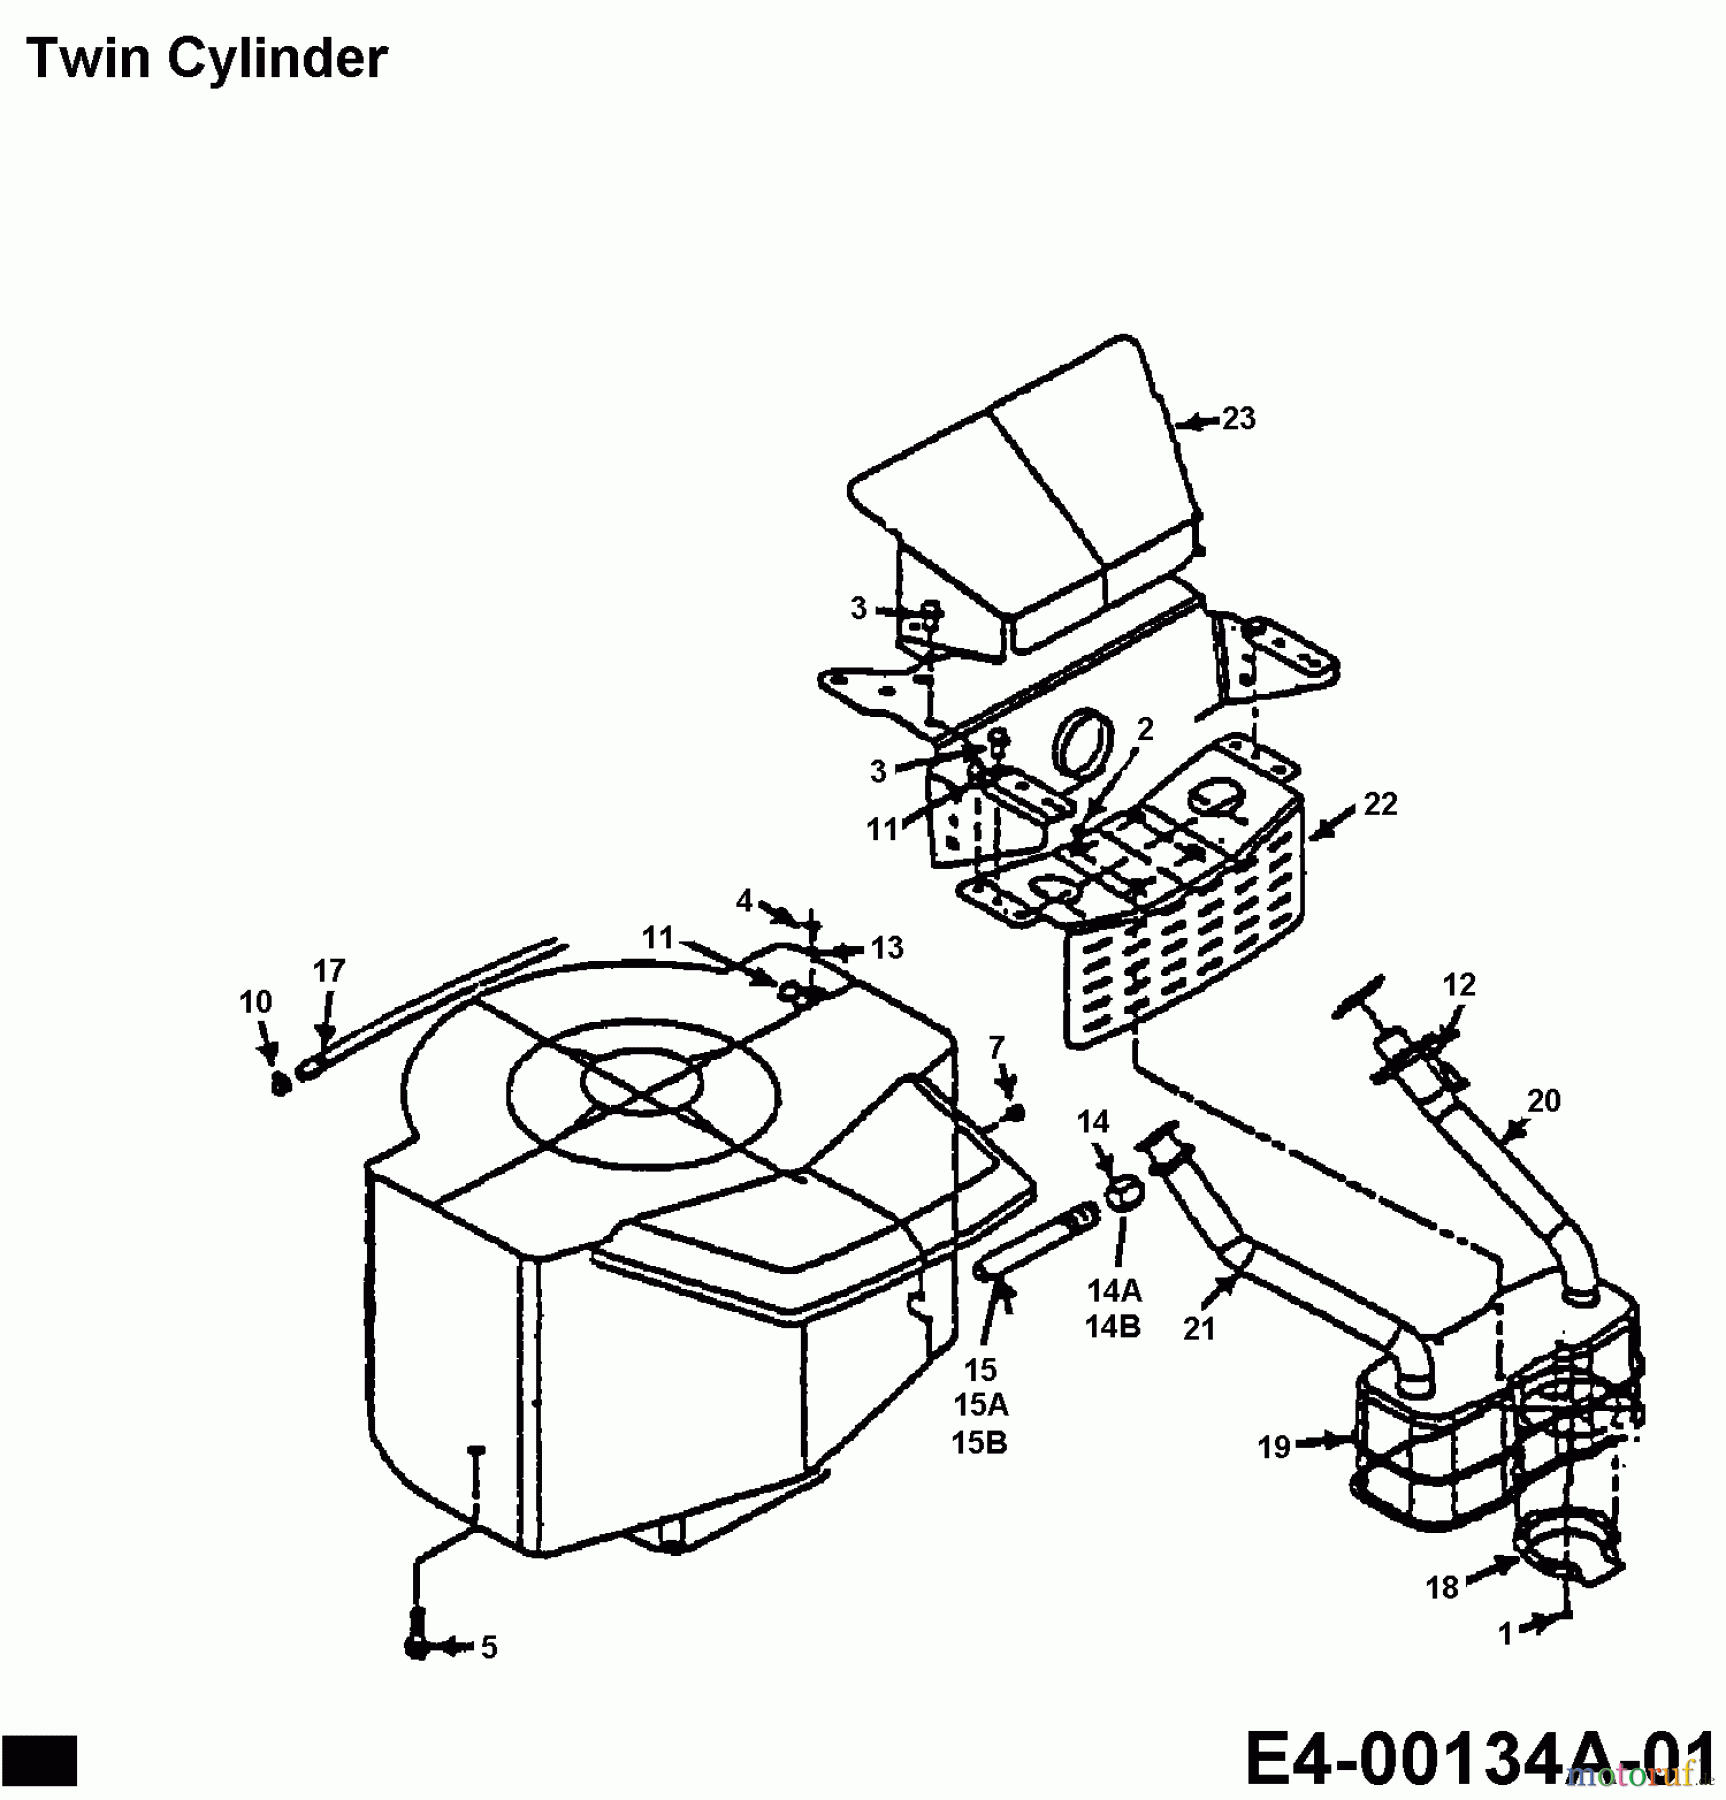  MTD Lawn tractors E 165 13AT765N678  (1997) Engine accessories